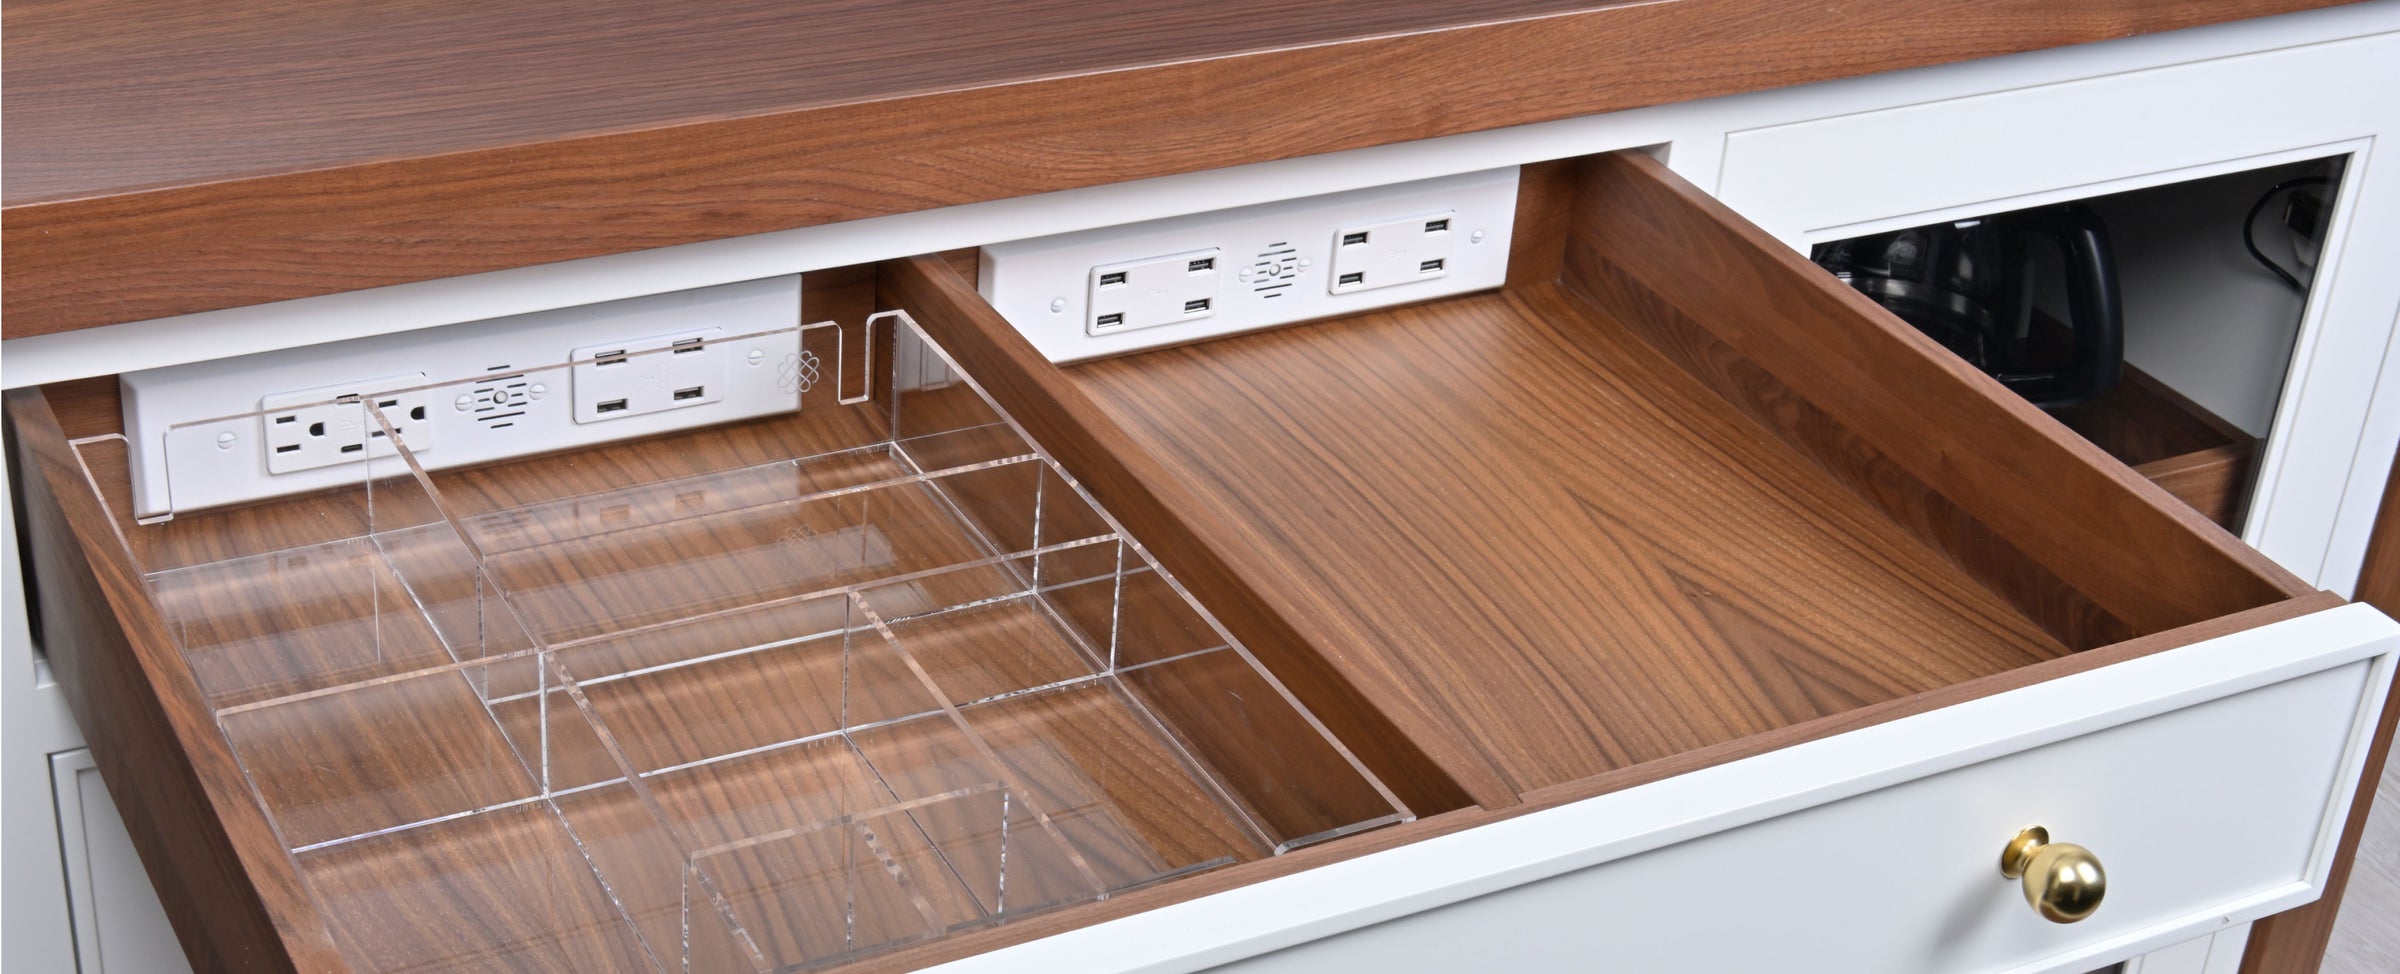 Eliminate Cord and Device Clutter from Countertops